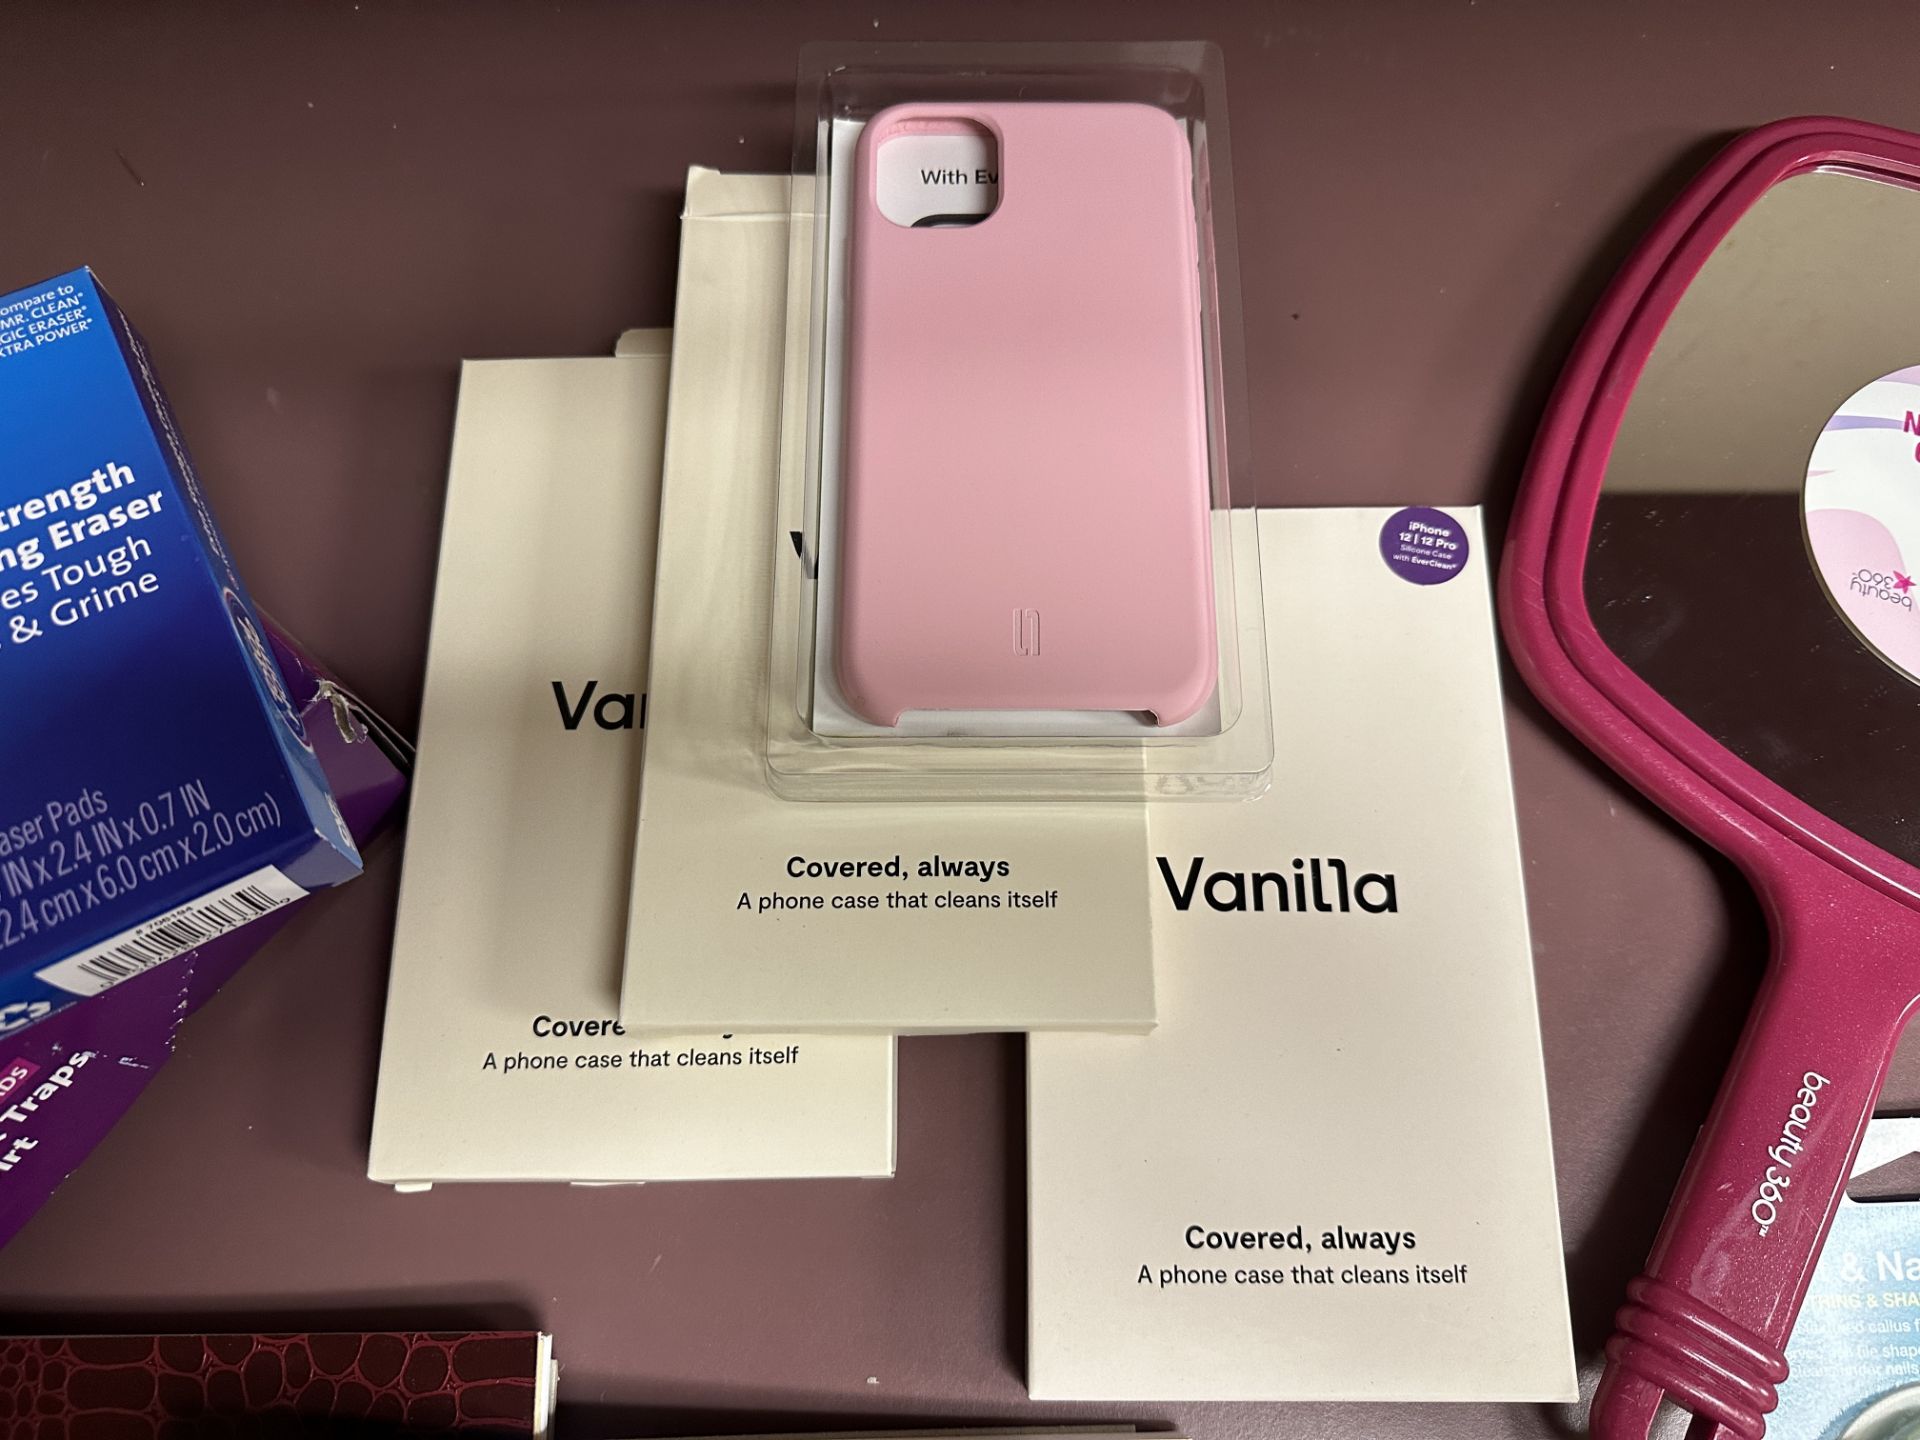 Mixed lot of Retail items: CVS Beauty , 3 Iphone cases (11, 12, 12 Mini), Notebooks, Etc ARA51 - Image 4 of 5